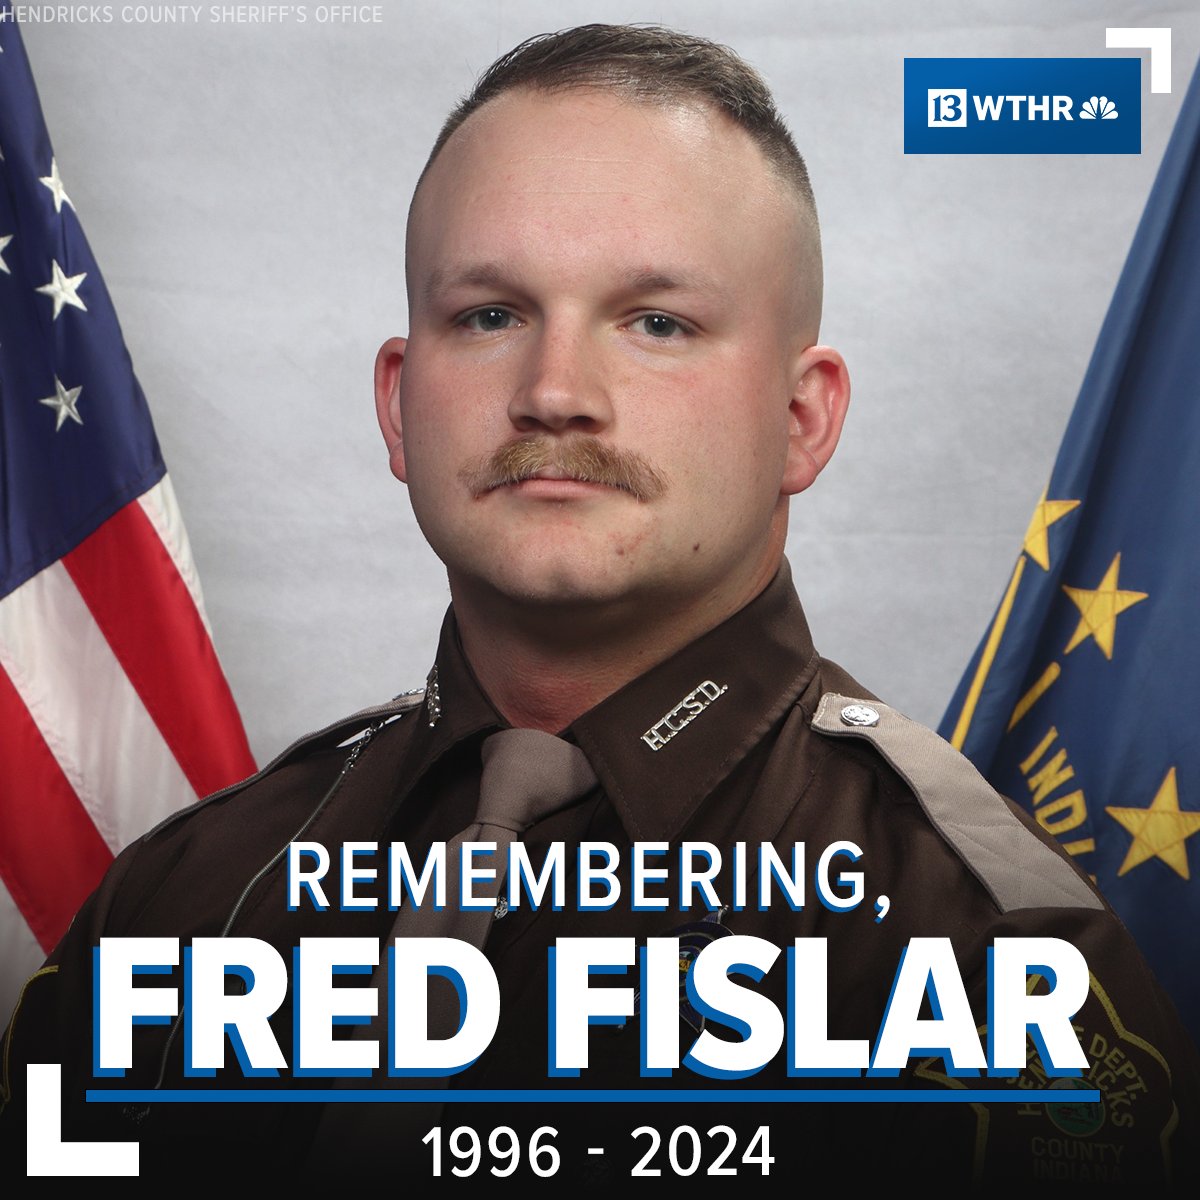 Public visitation and funeral services are being held today for fallen Hendricks County Sheriff's Office Deputy Fred Fislar, who died in the line of duty last week. Visitation will start at 1:30 p.m. at Cloverdale High School, followed by funeral services at 3 p.m. 📸 HCSO